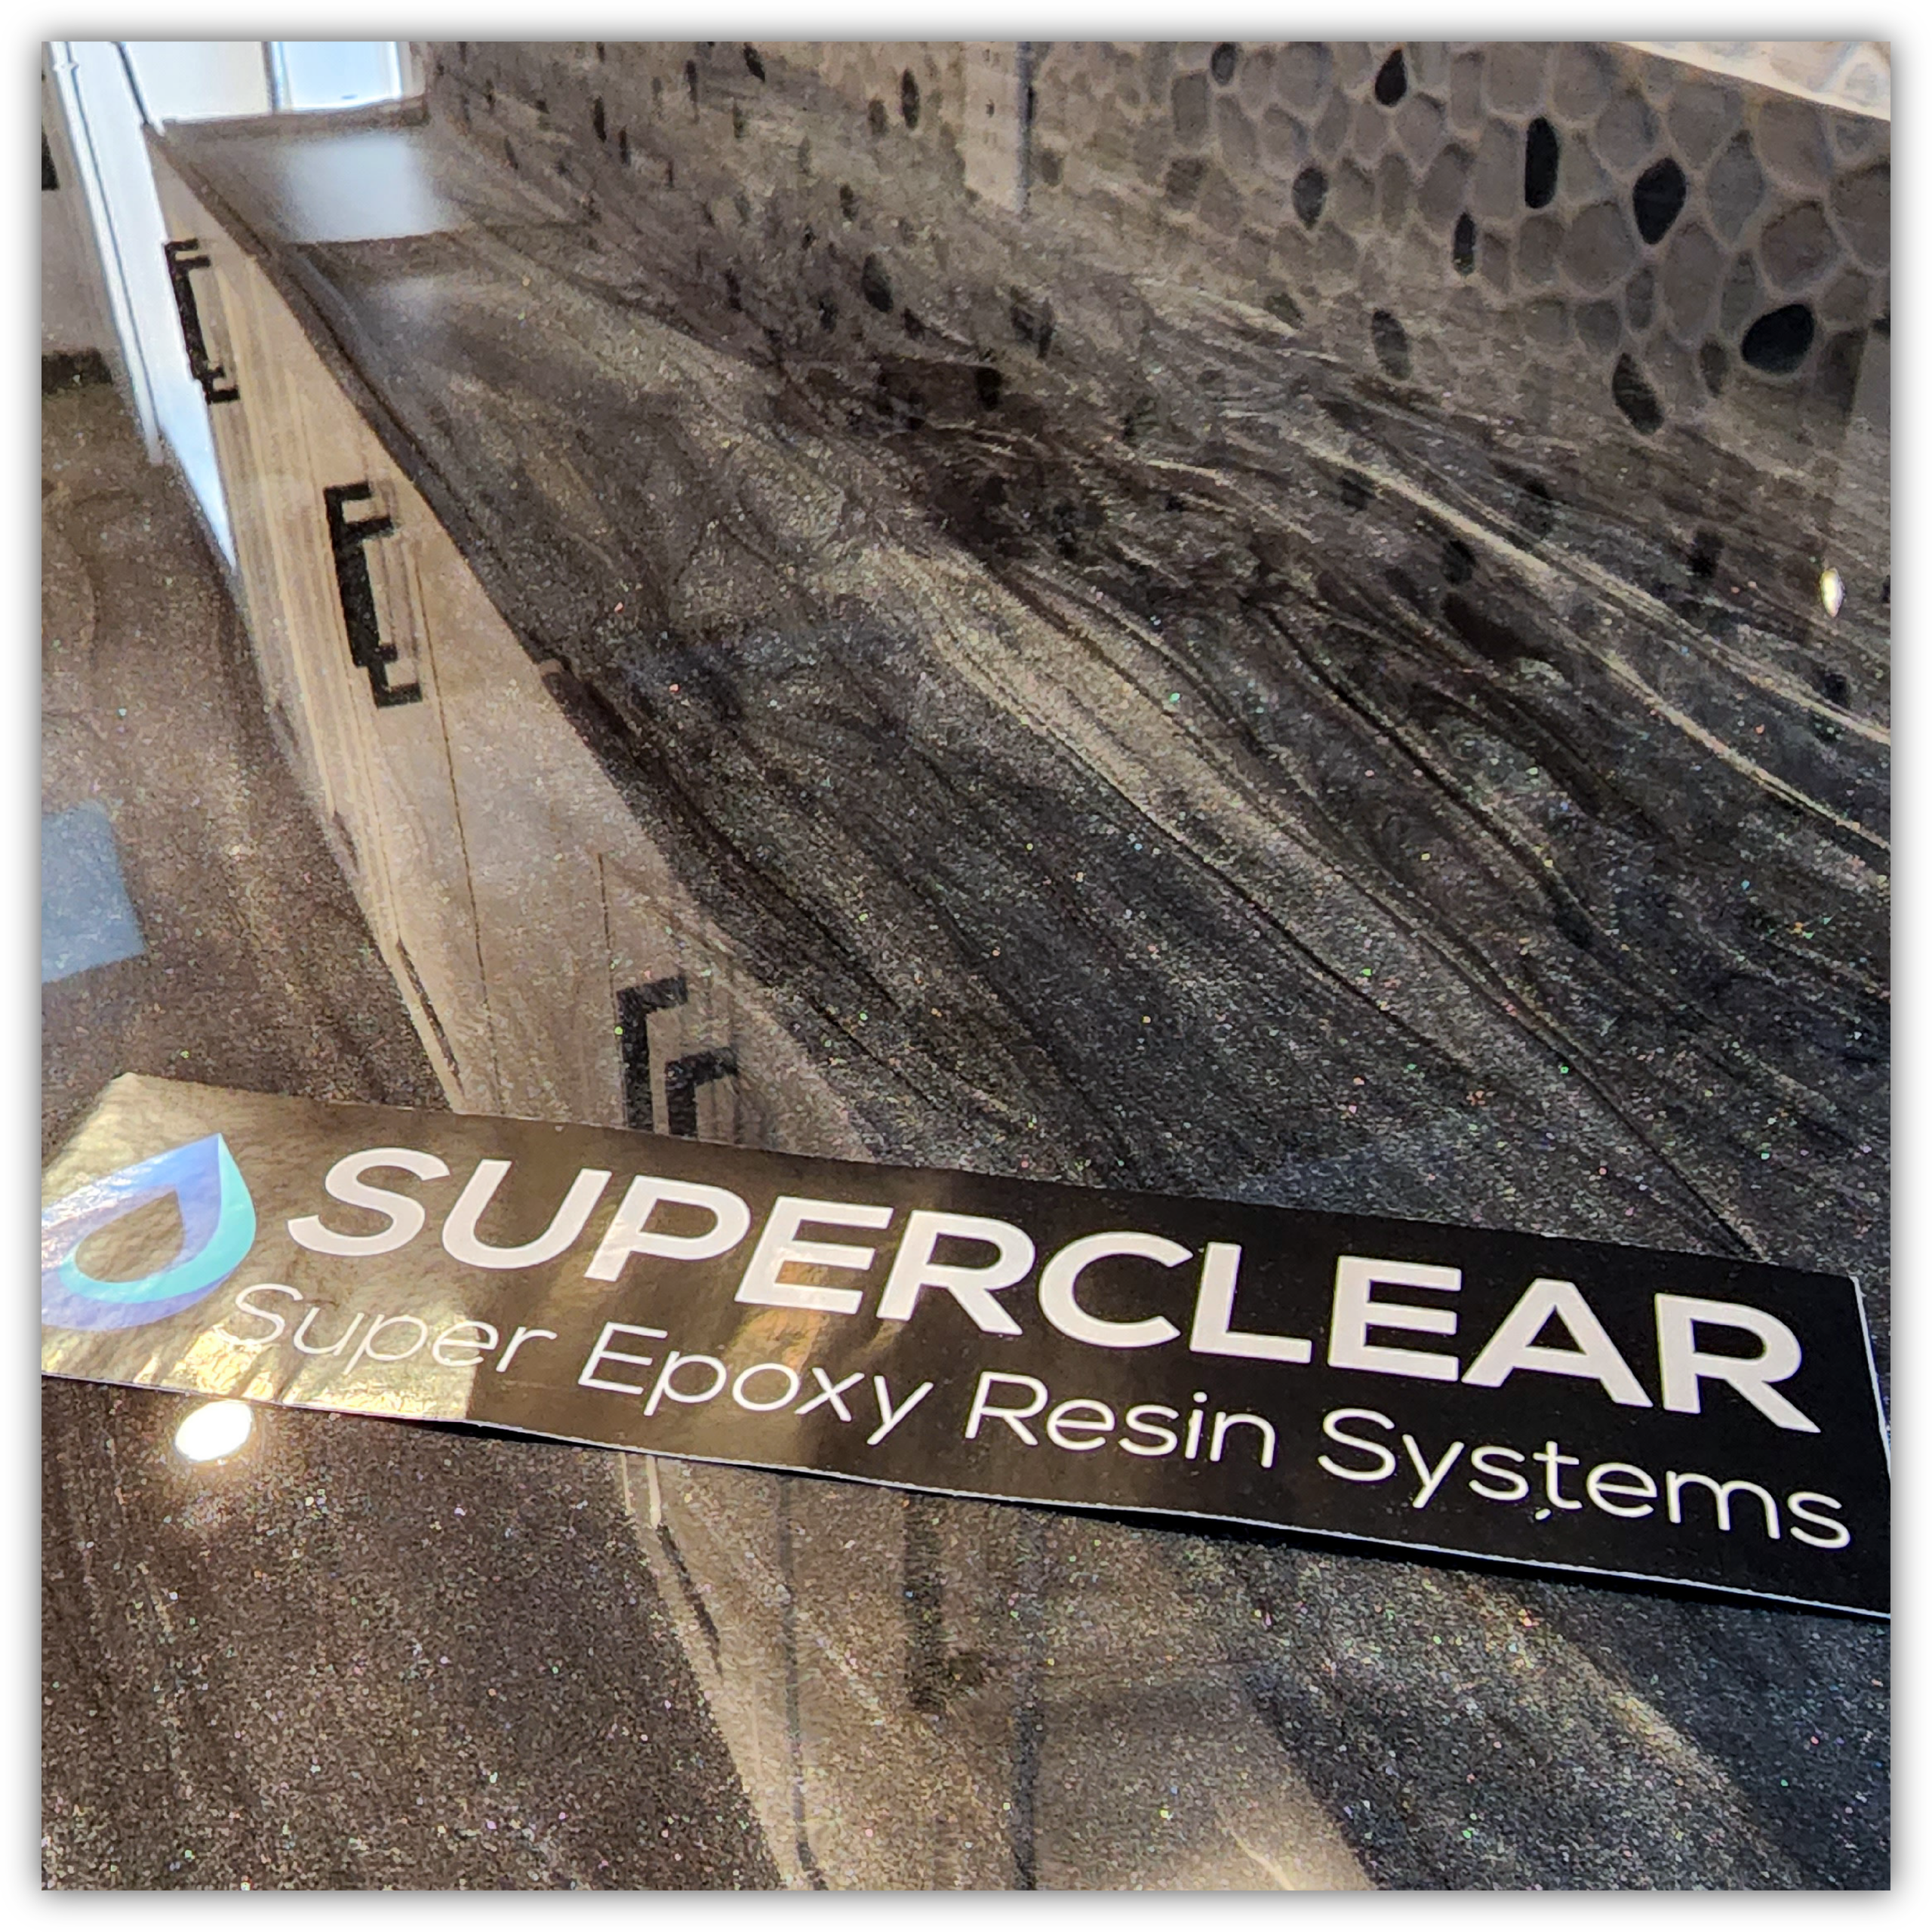 Superclear Table Top 1:1 Epoxy - FGCI